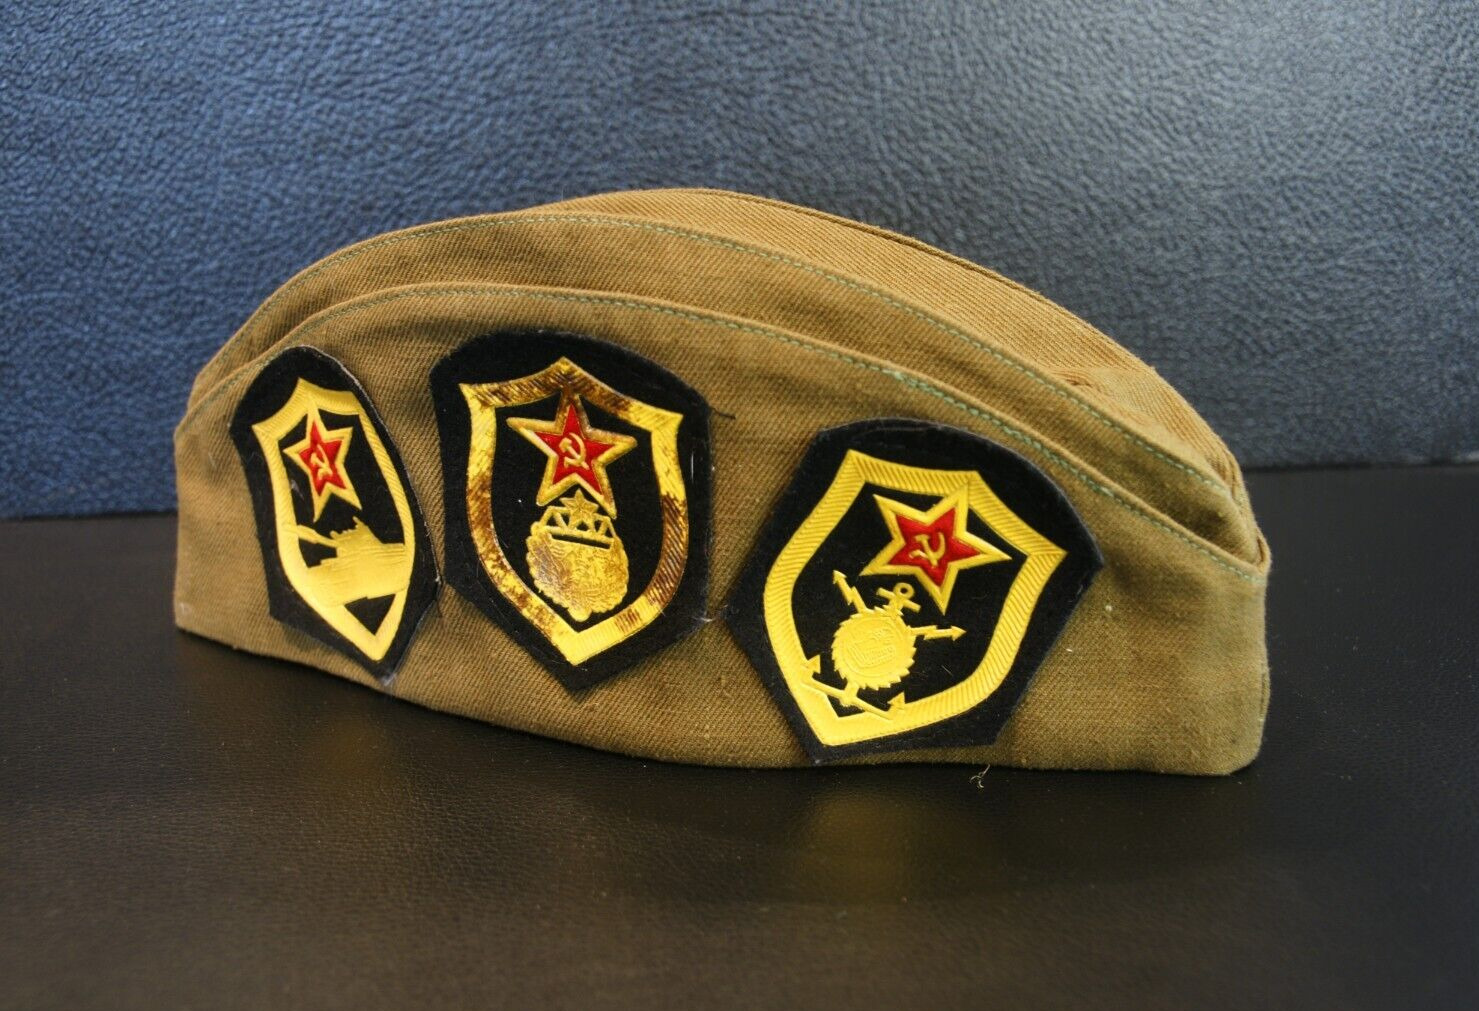 USSR Soviet Russian Military Pilotka Cap with 21 Badges, Pins, Patches; Size 57